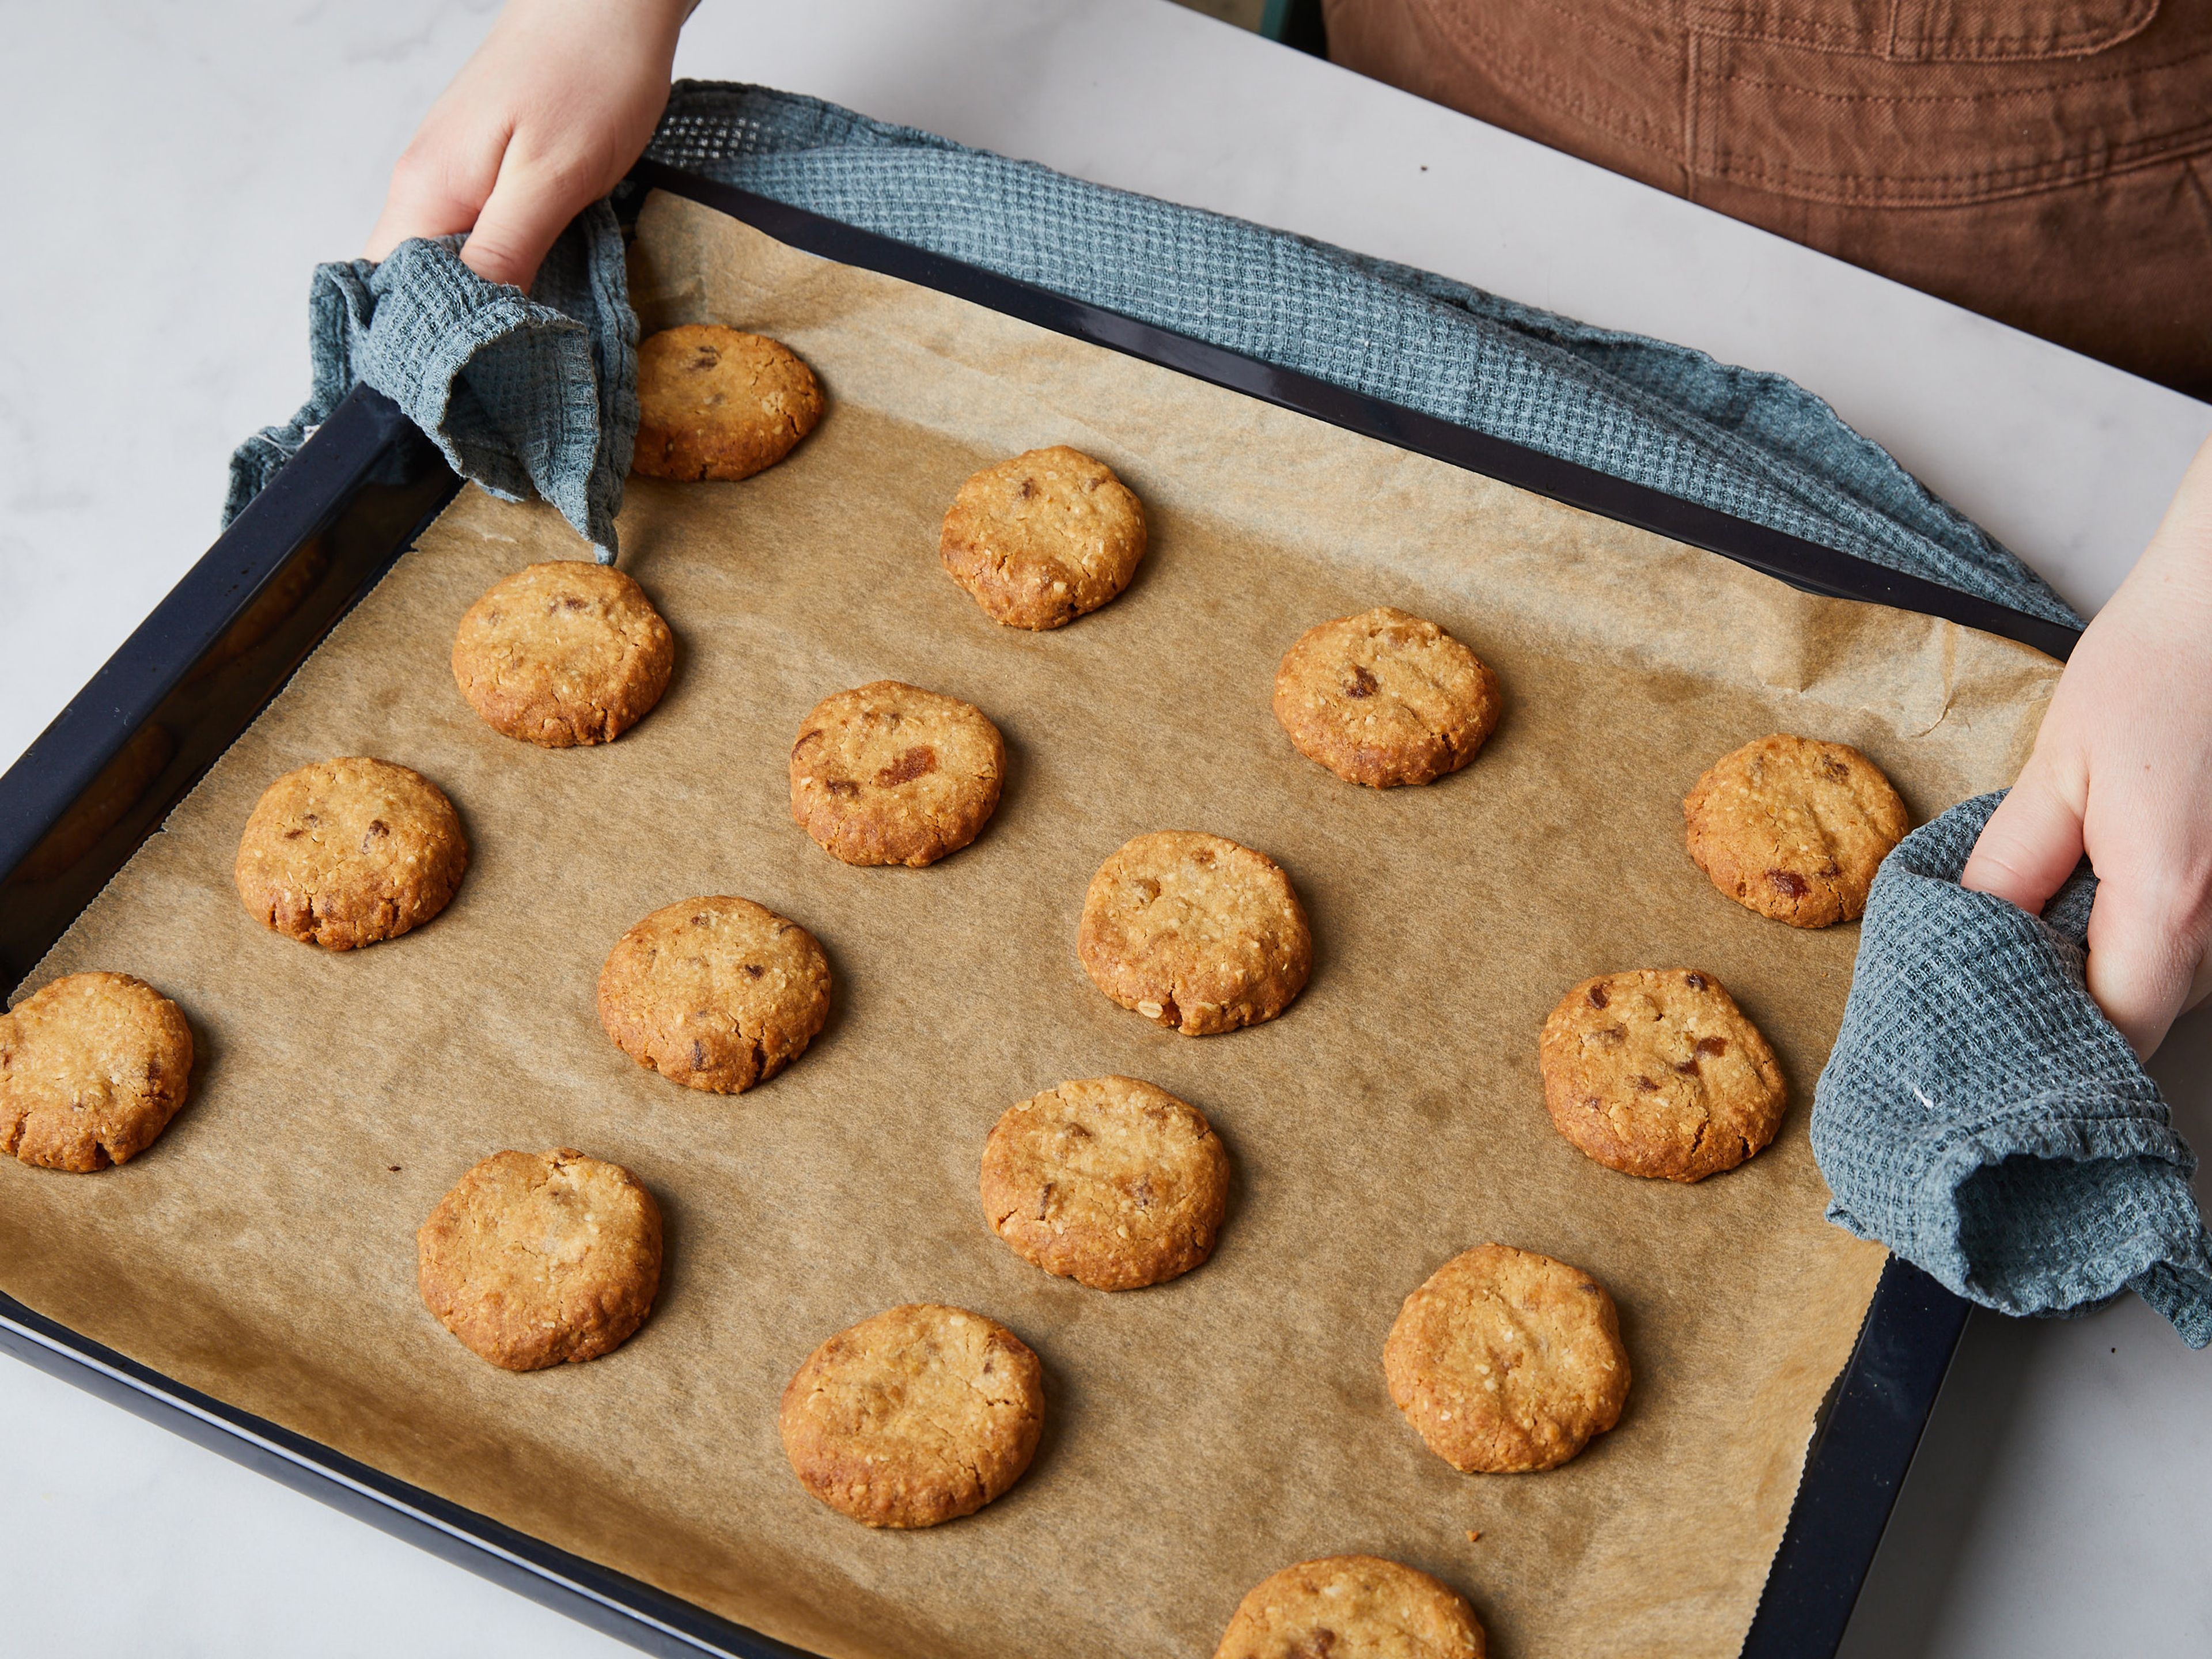 Transfer the cookies to the preheated oven and bake for approx. 15 – 16 min., or until pale golden. Remove from the oven, and let cool for approx. 20 – 30 min. Serve immediately or store in an airtight container. Enjoy!